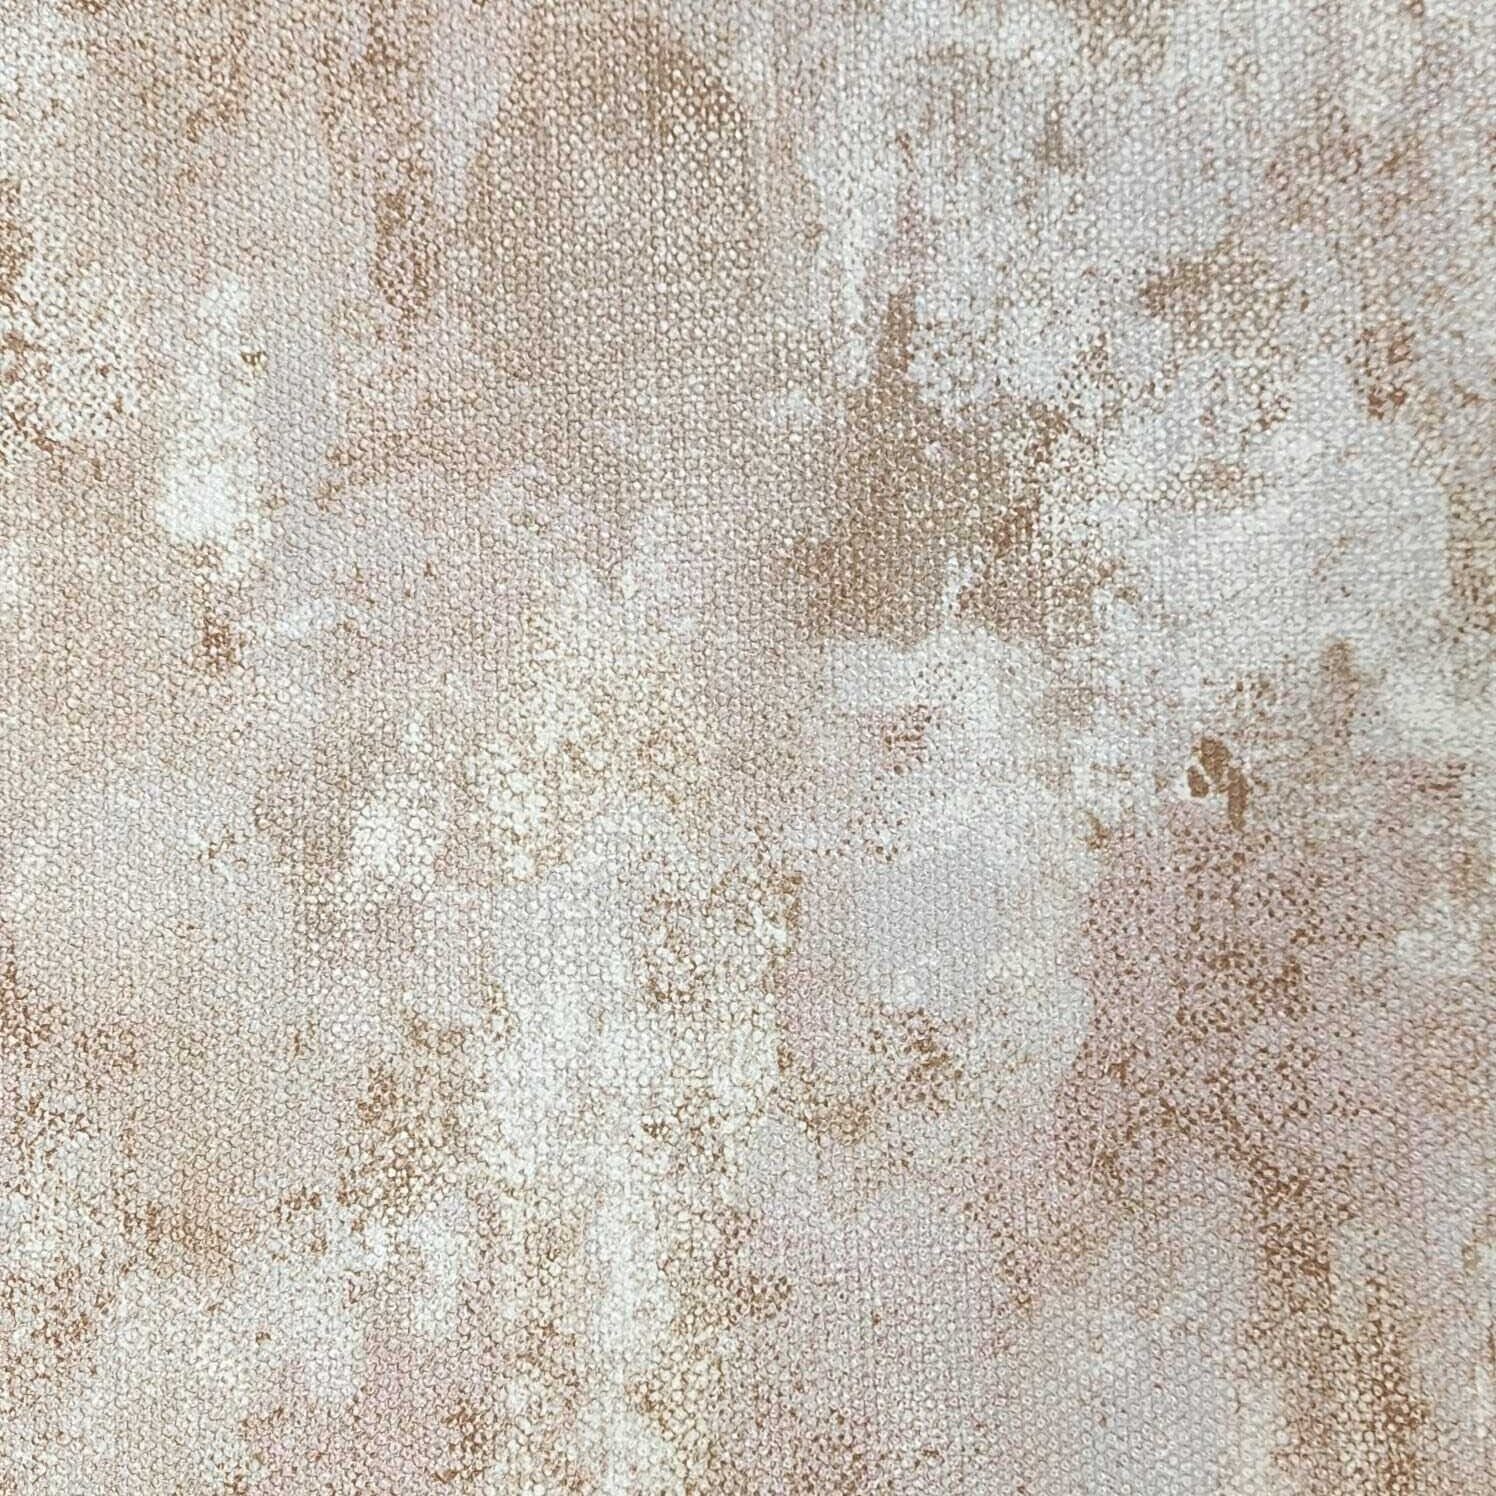 Z3466 Industrial distressed stains pattern White rust brown bronze 